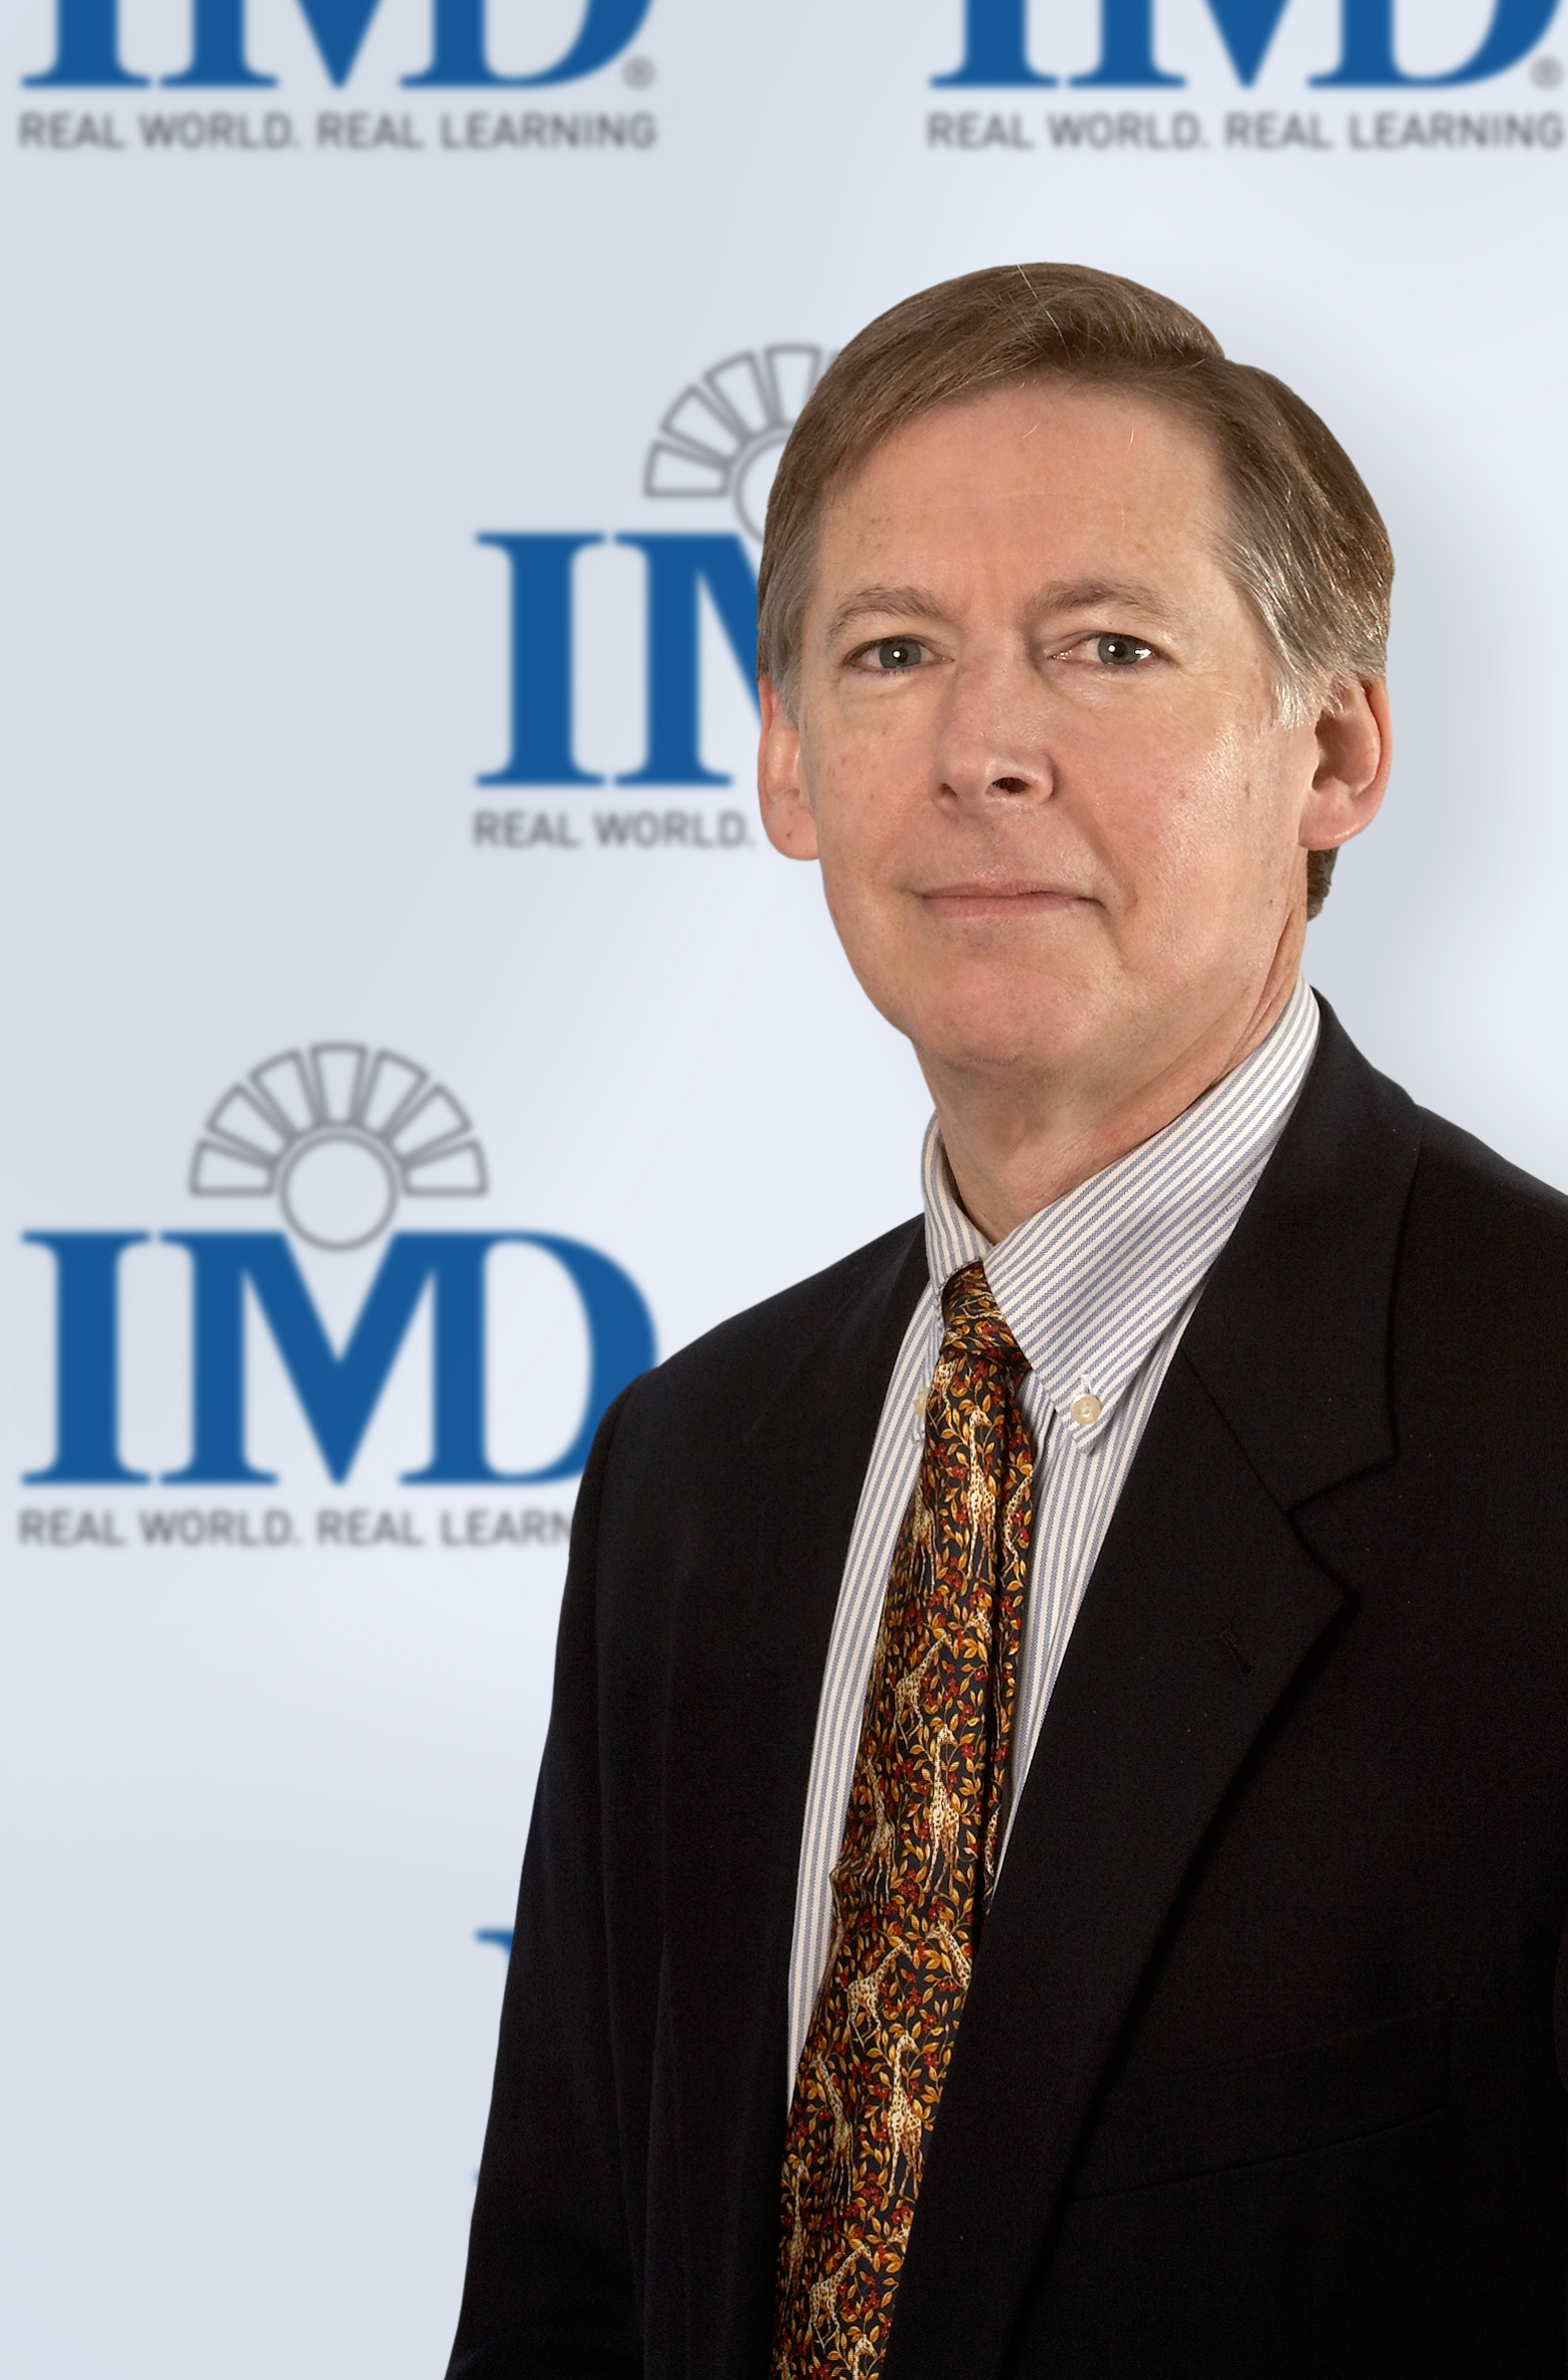 Phil Rosenzweig, professor of strategy and international business, IMD